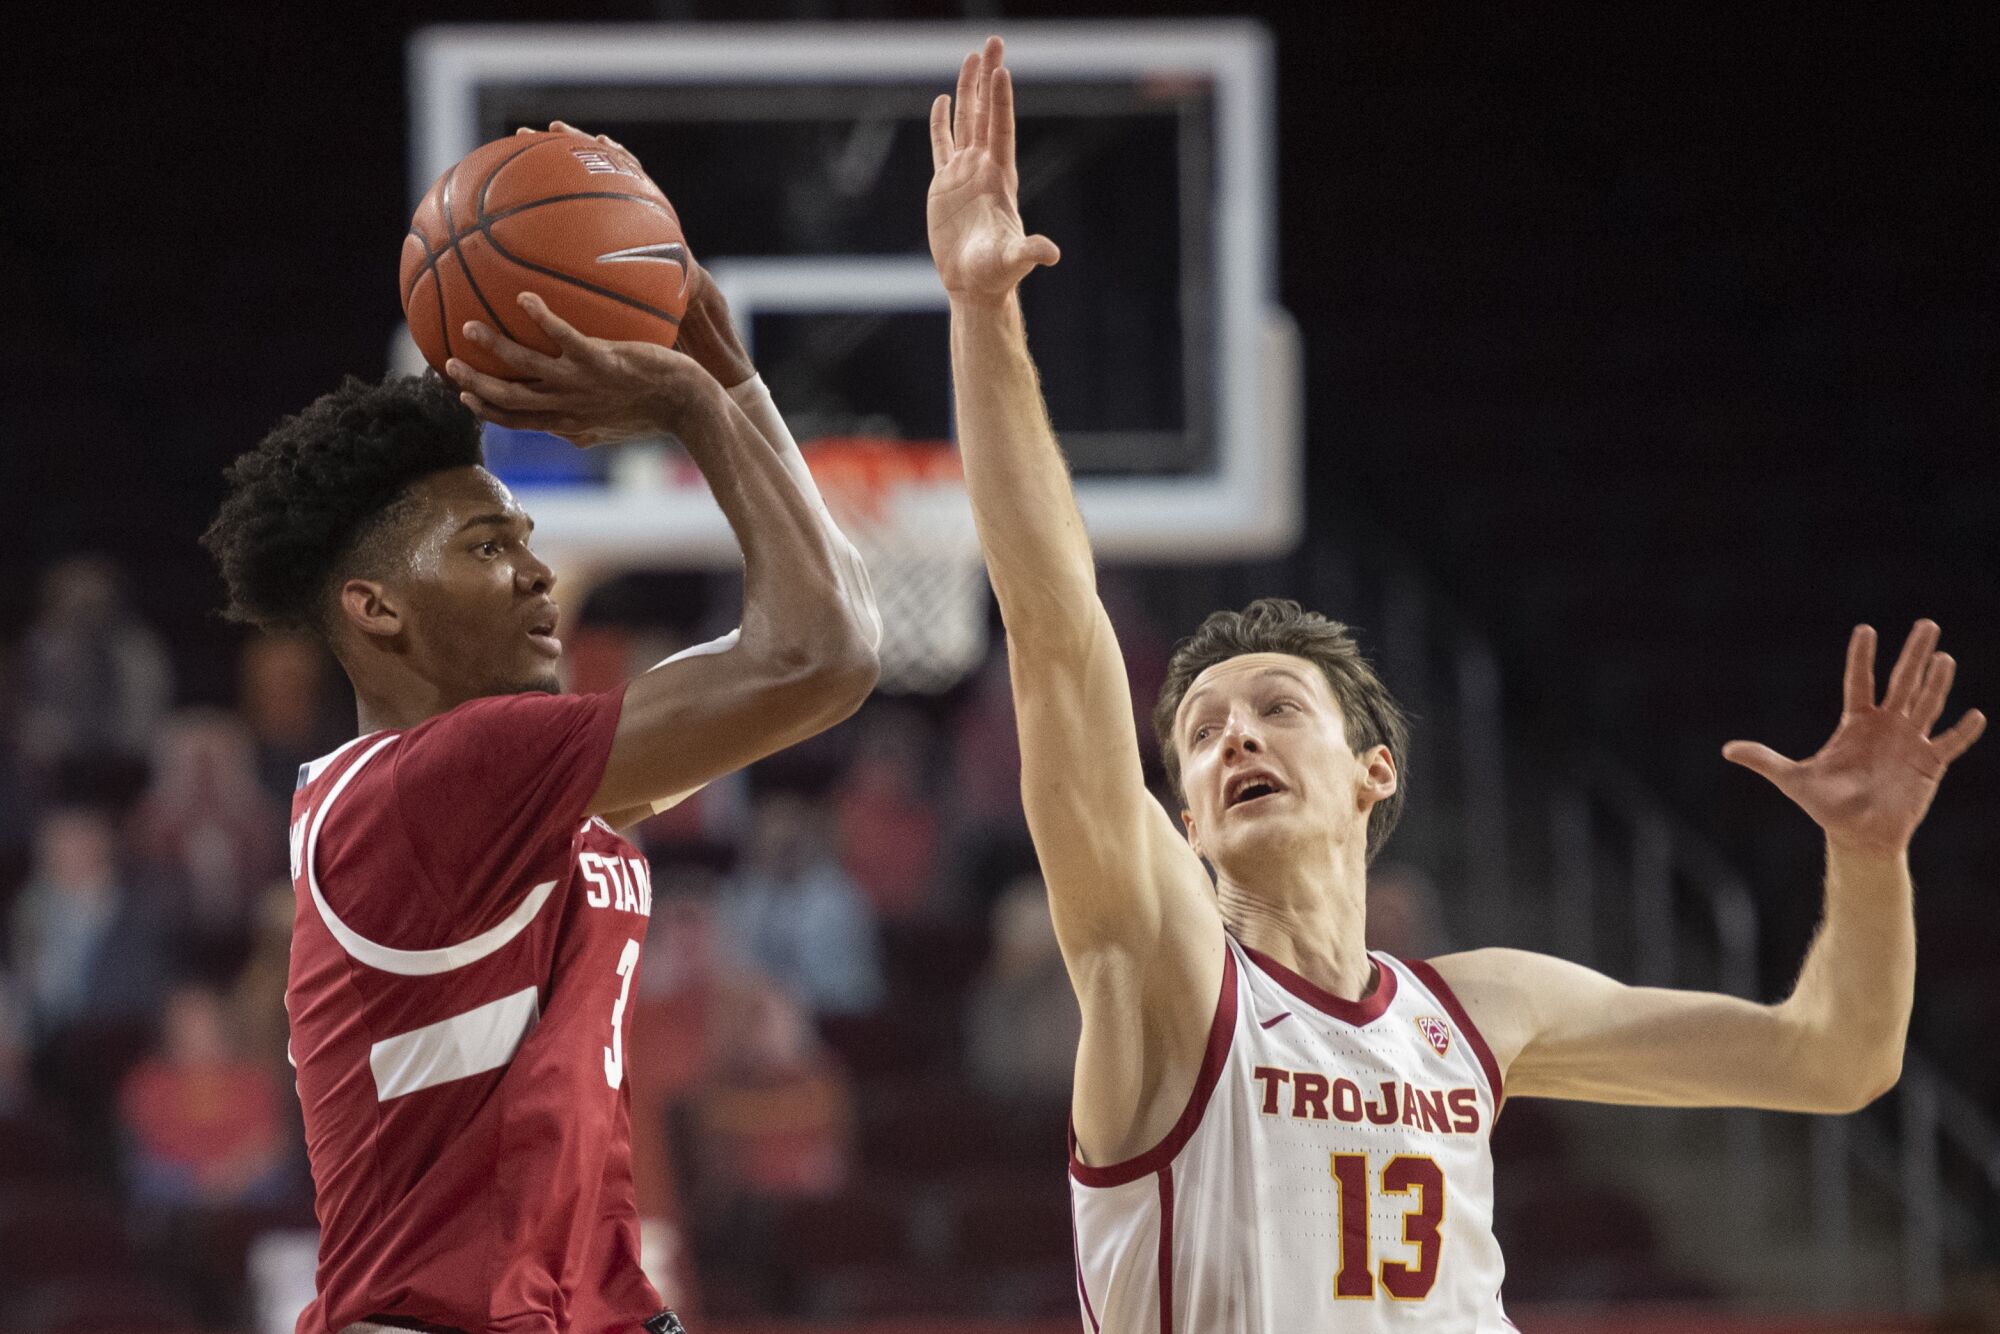 Stanford forward Ziaire Williams shoots while under pressure from USC guard Drew Peterson.